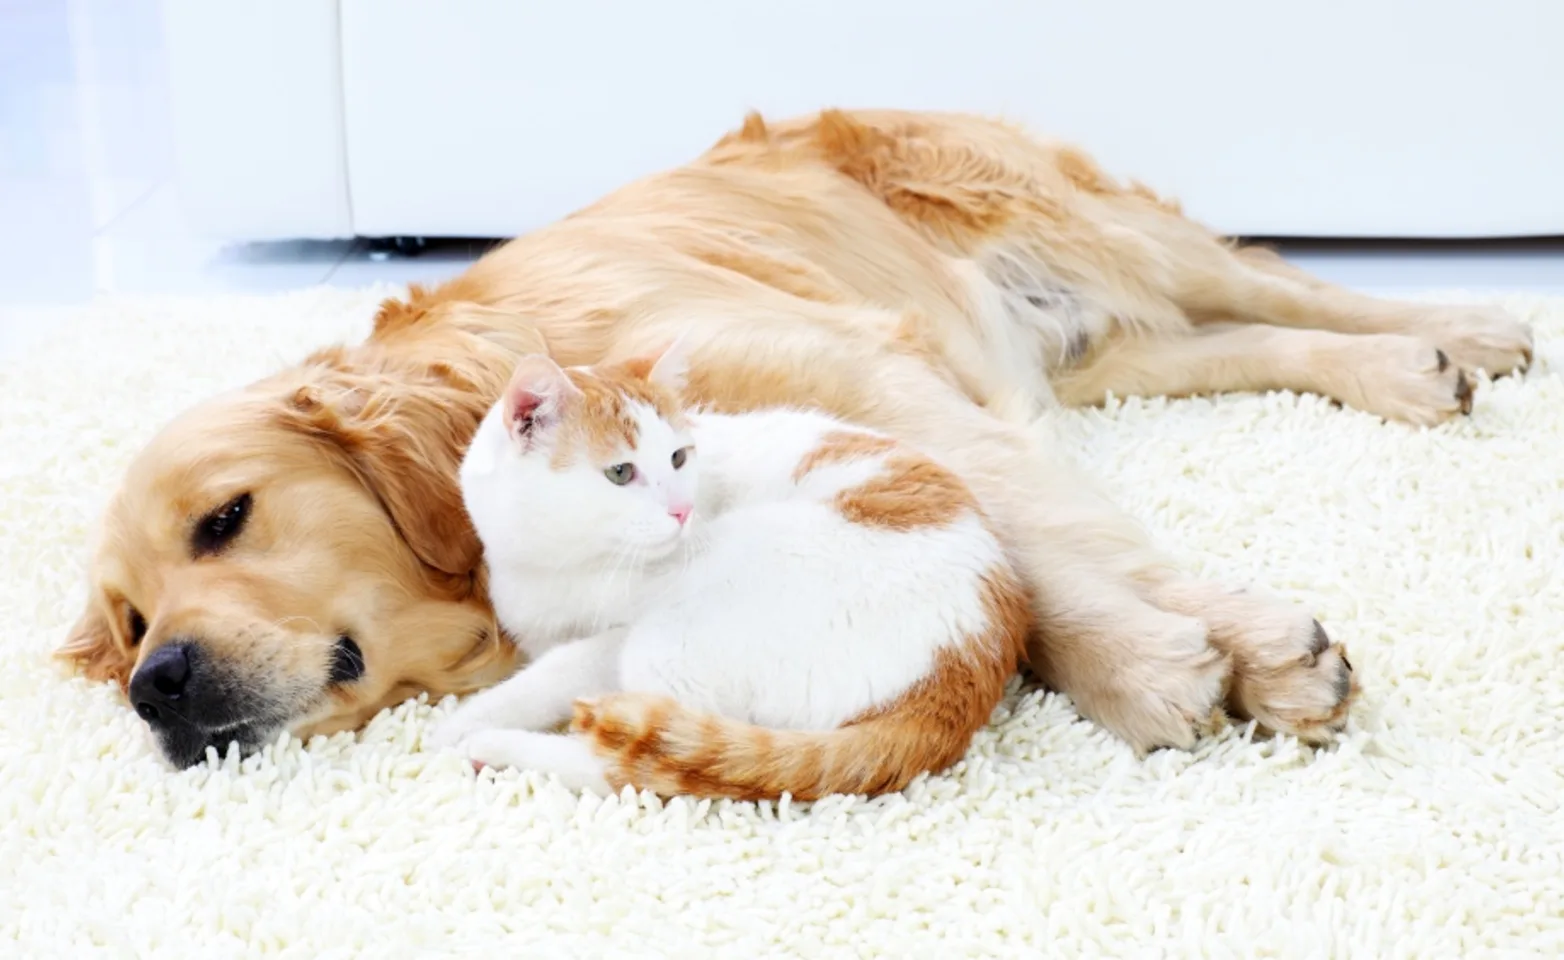 A dog and cat snuggling together on a rug